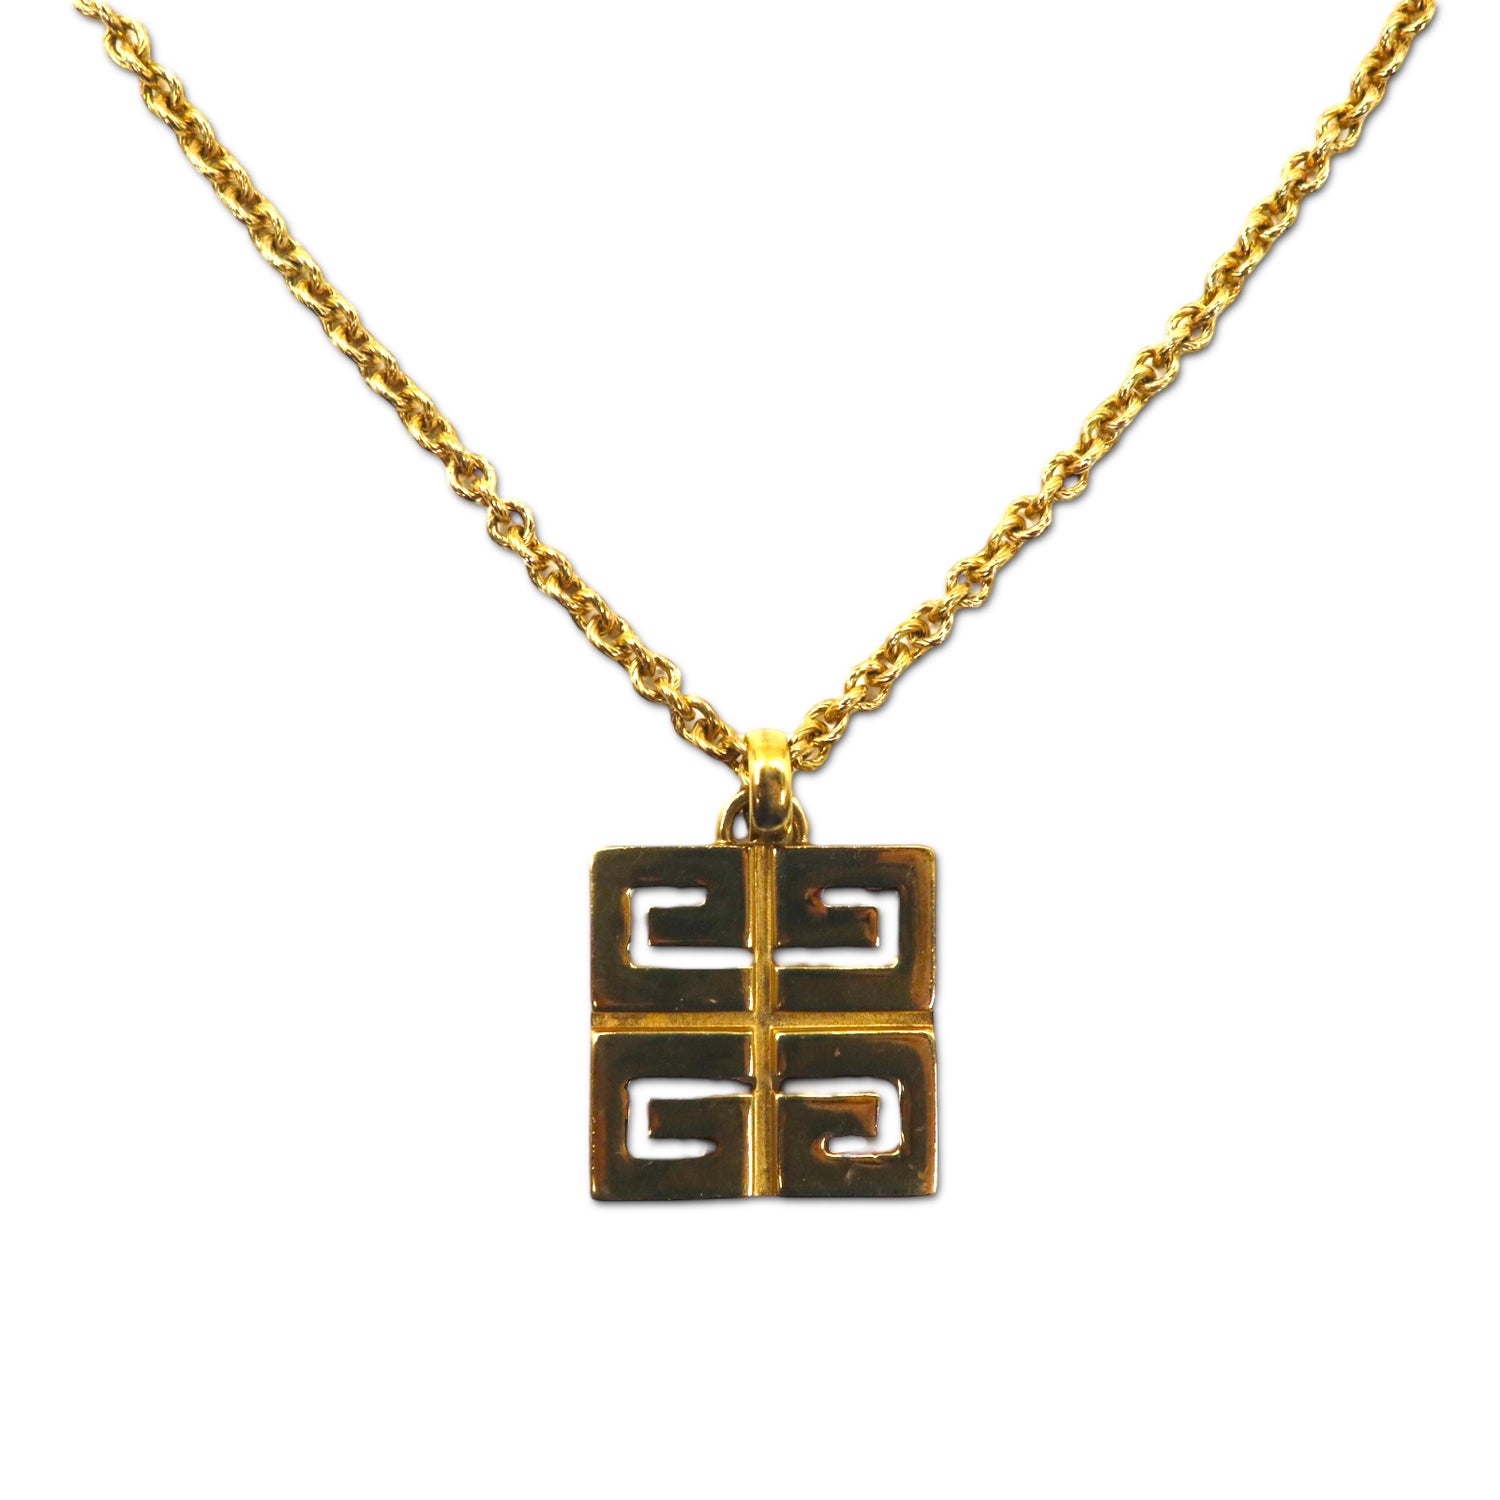 GIVENCHY VINTAGE Necklace Gold Square Logo Augu Chain 